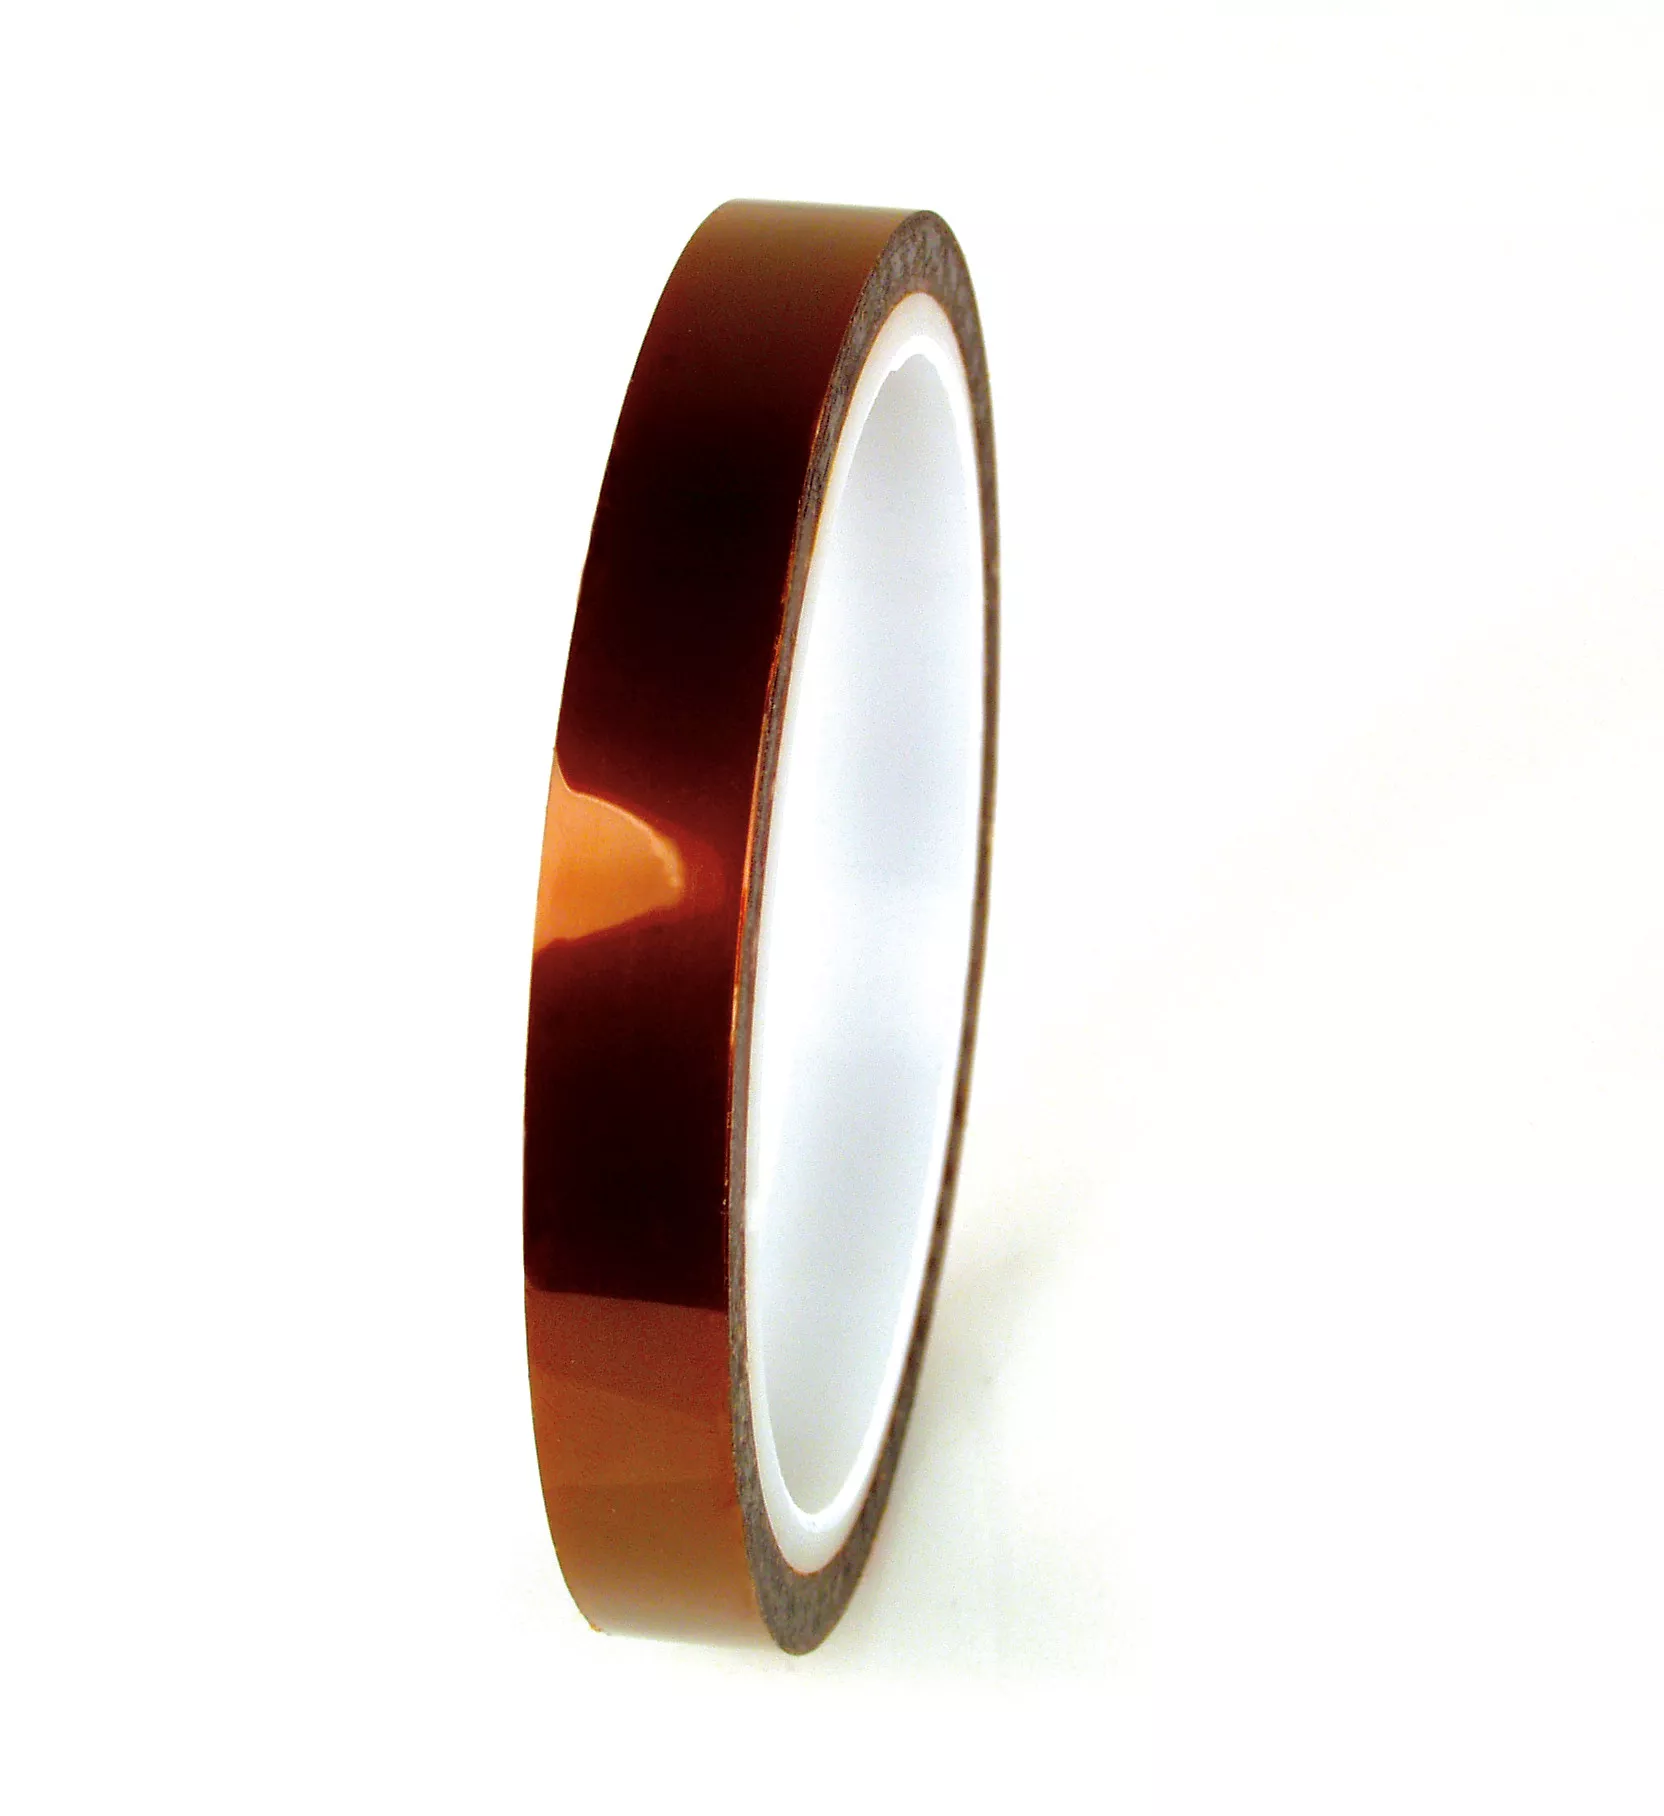 SKU 7010349606 | 3M™ Polyimide Film Electrical Tape 1218